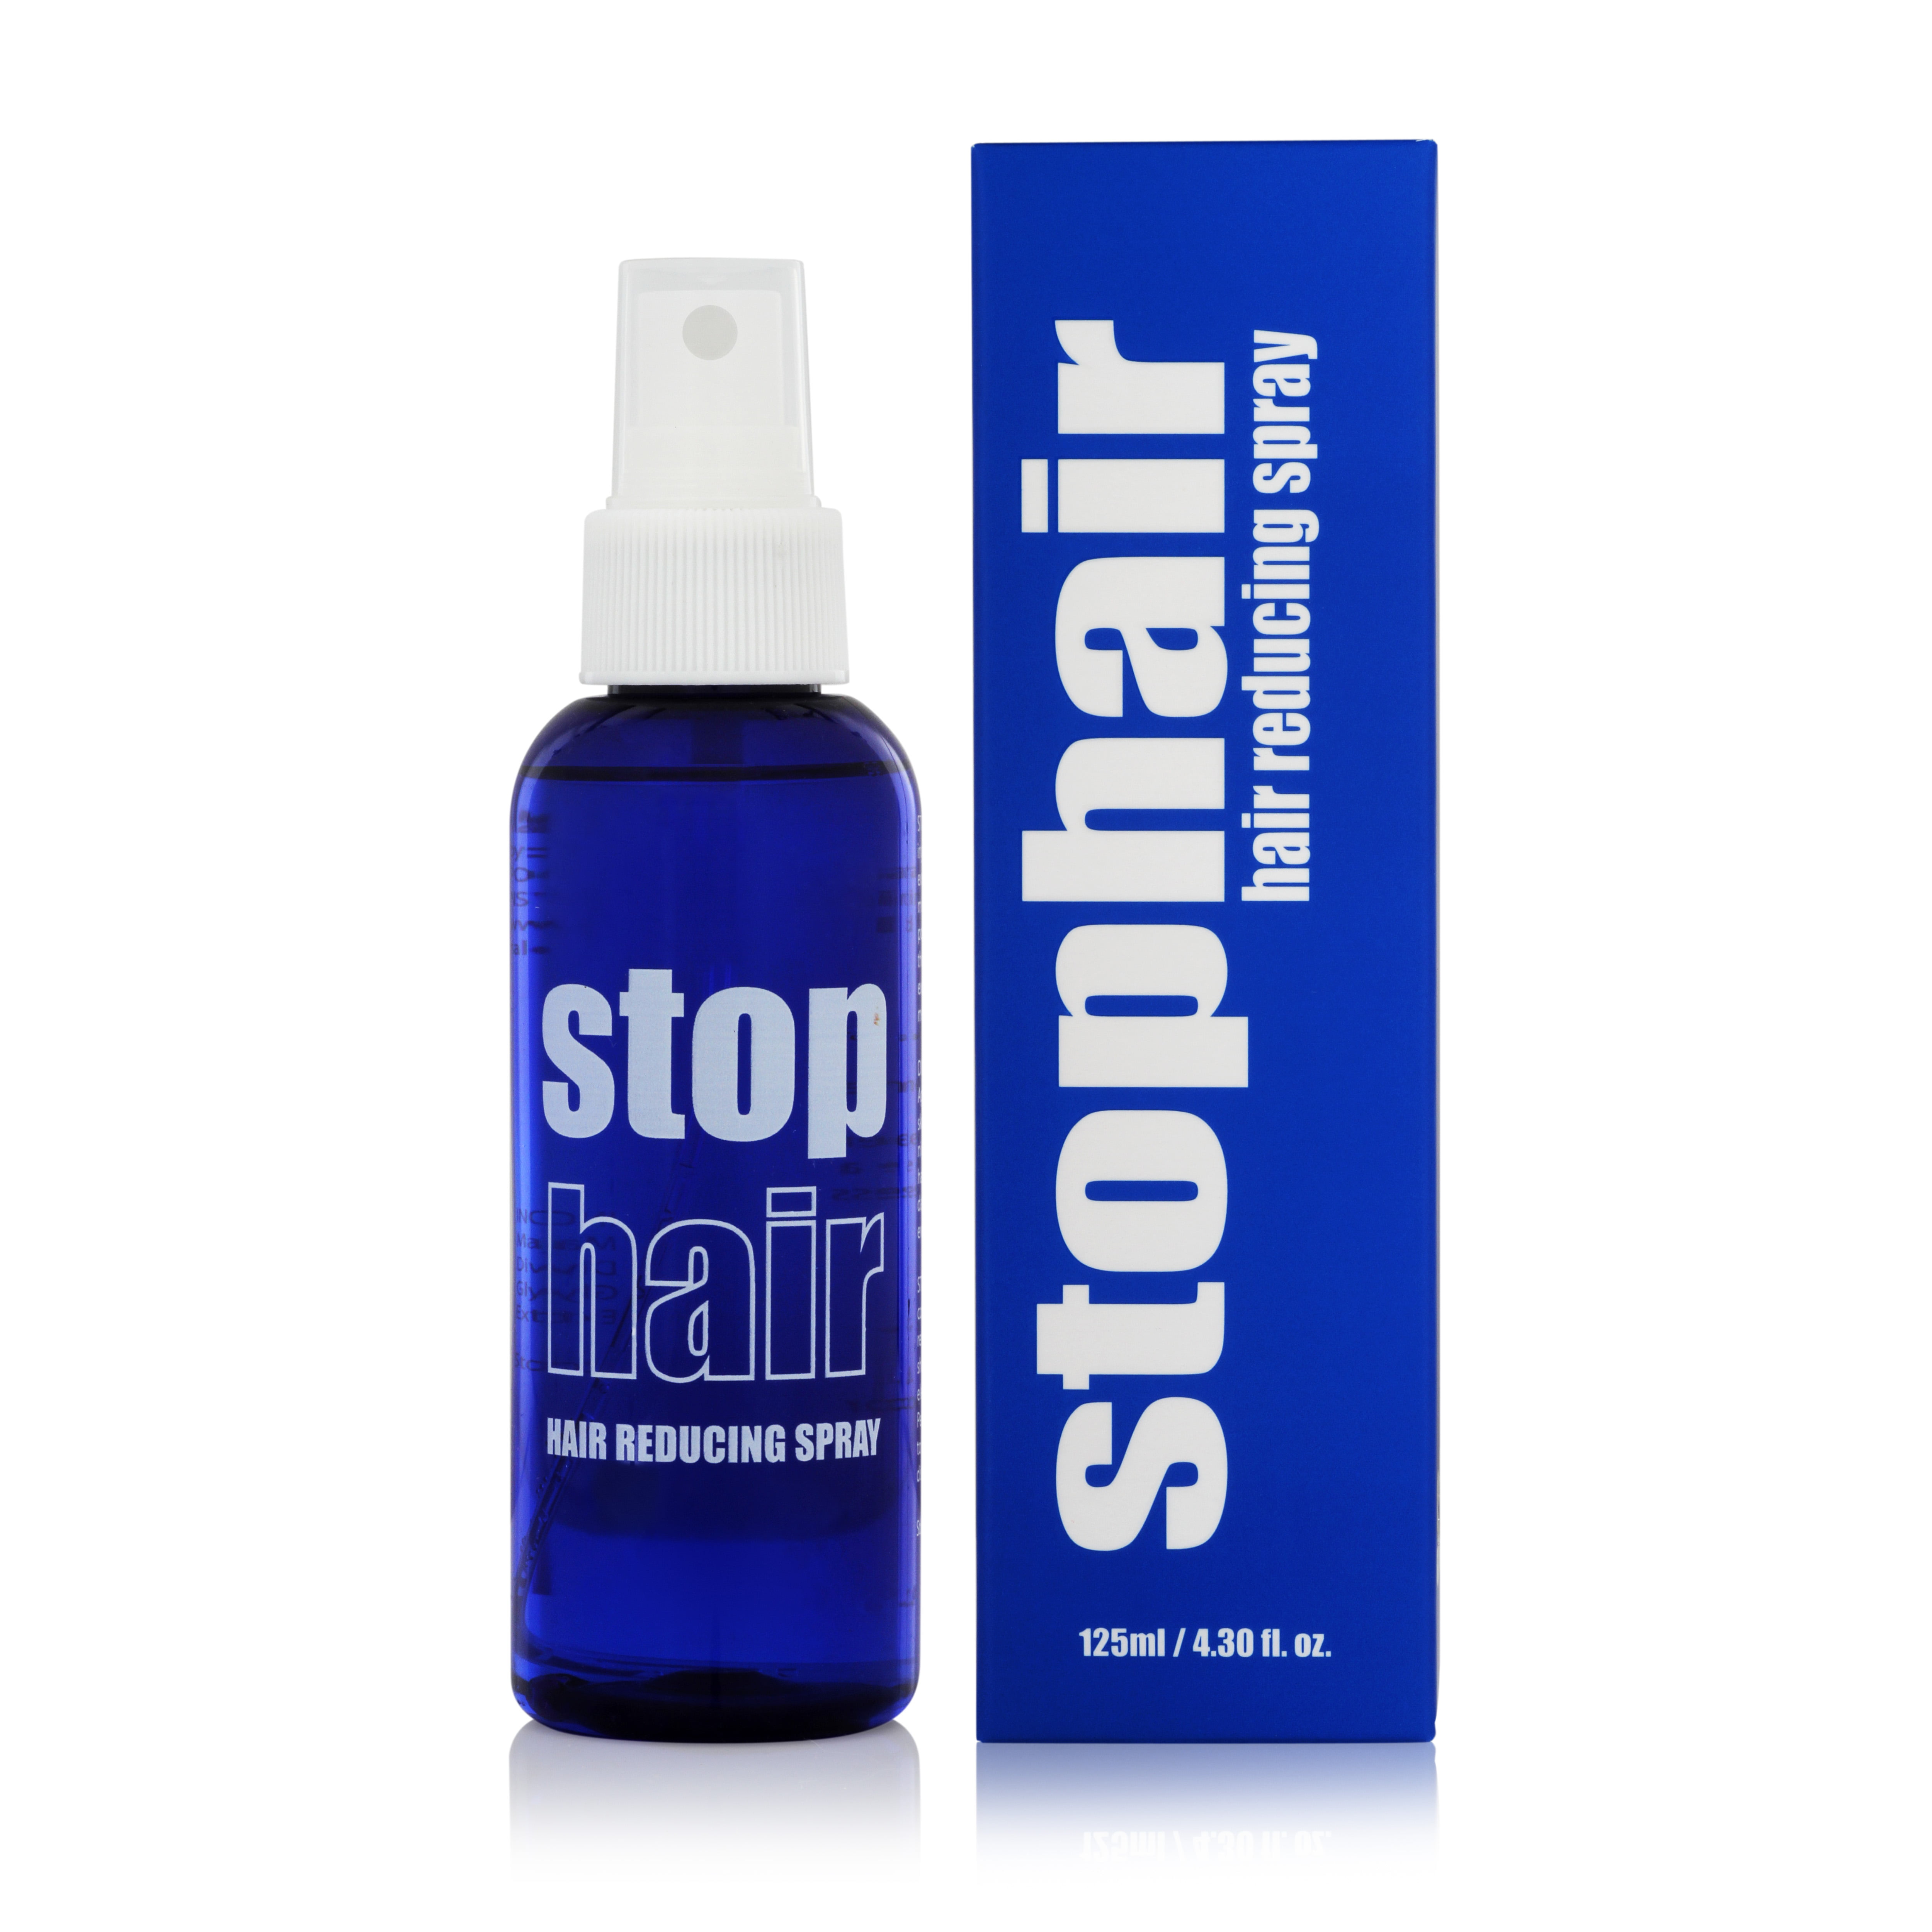 StopHair - All Natural Hair Inhibitor - Permanent Hair Removal for Women  and Men - Use After Epilation 